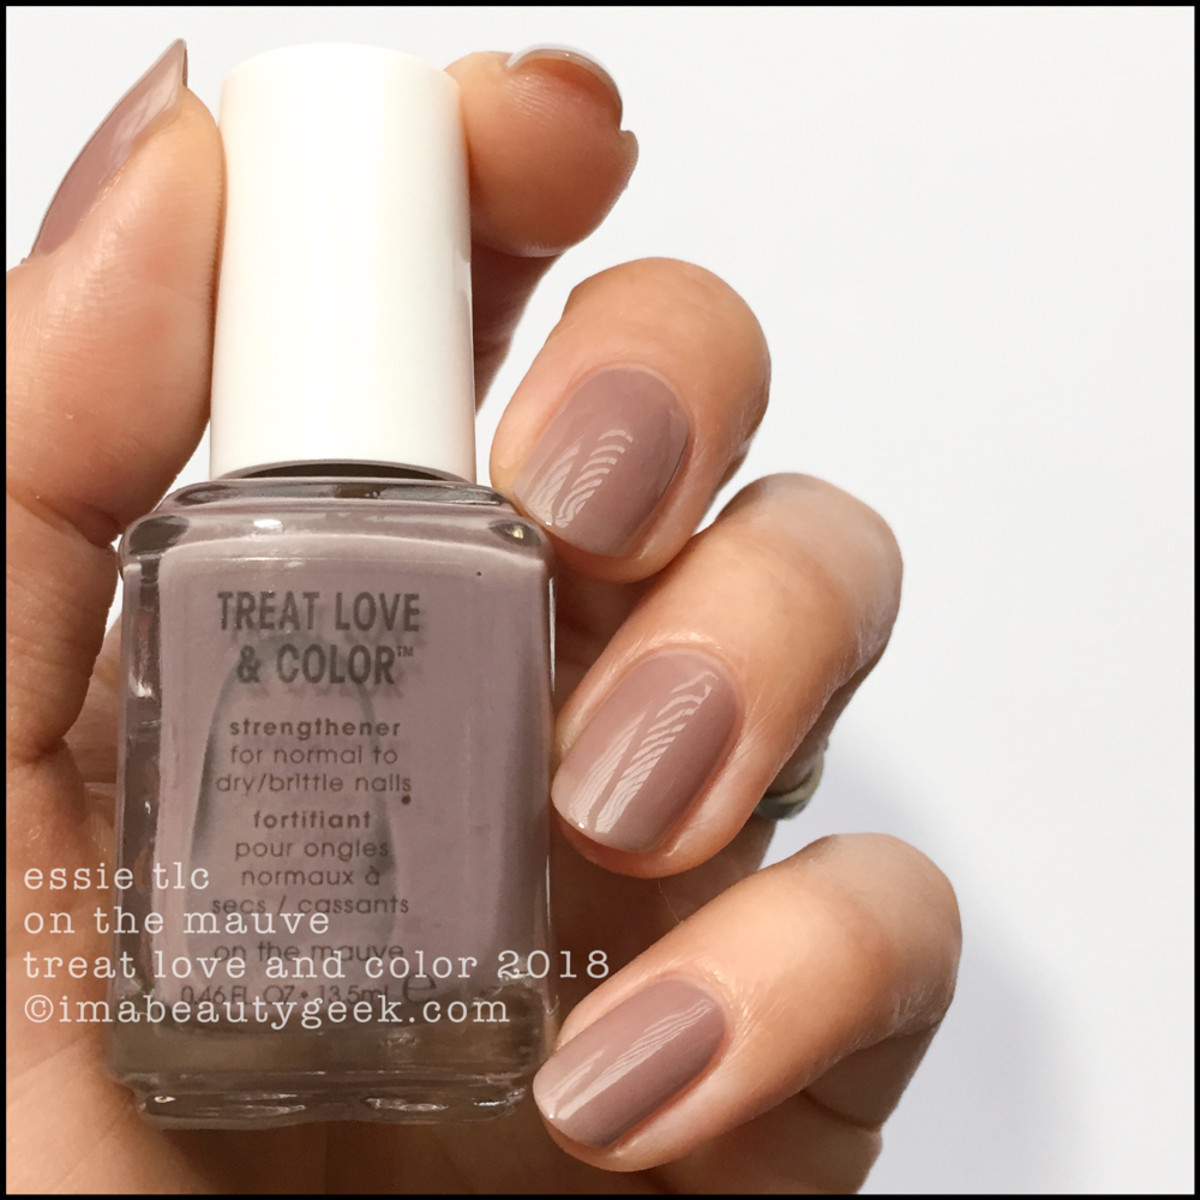 Essie TLC On The Mauve _ Essie Treat Love Color Swatches 2018 Shade Expansion